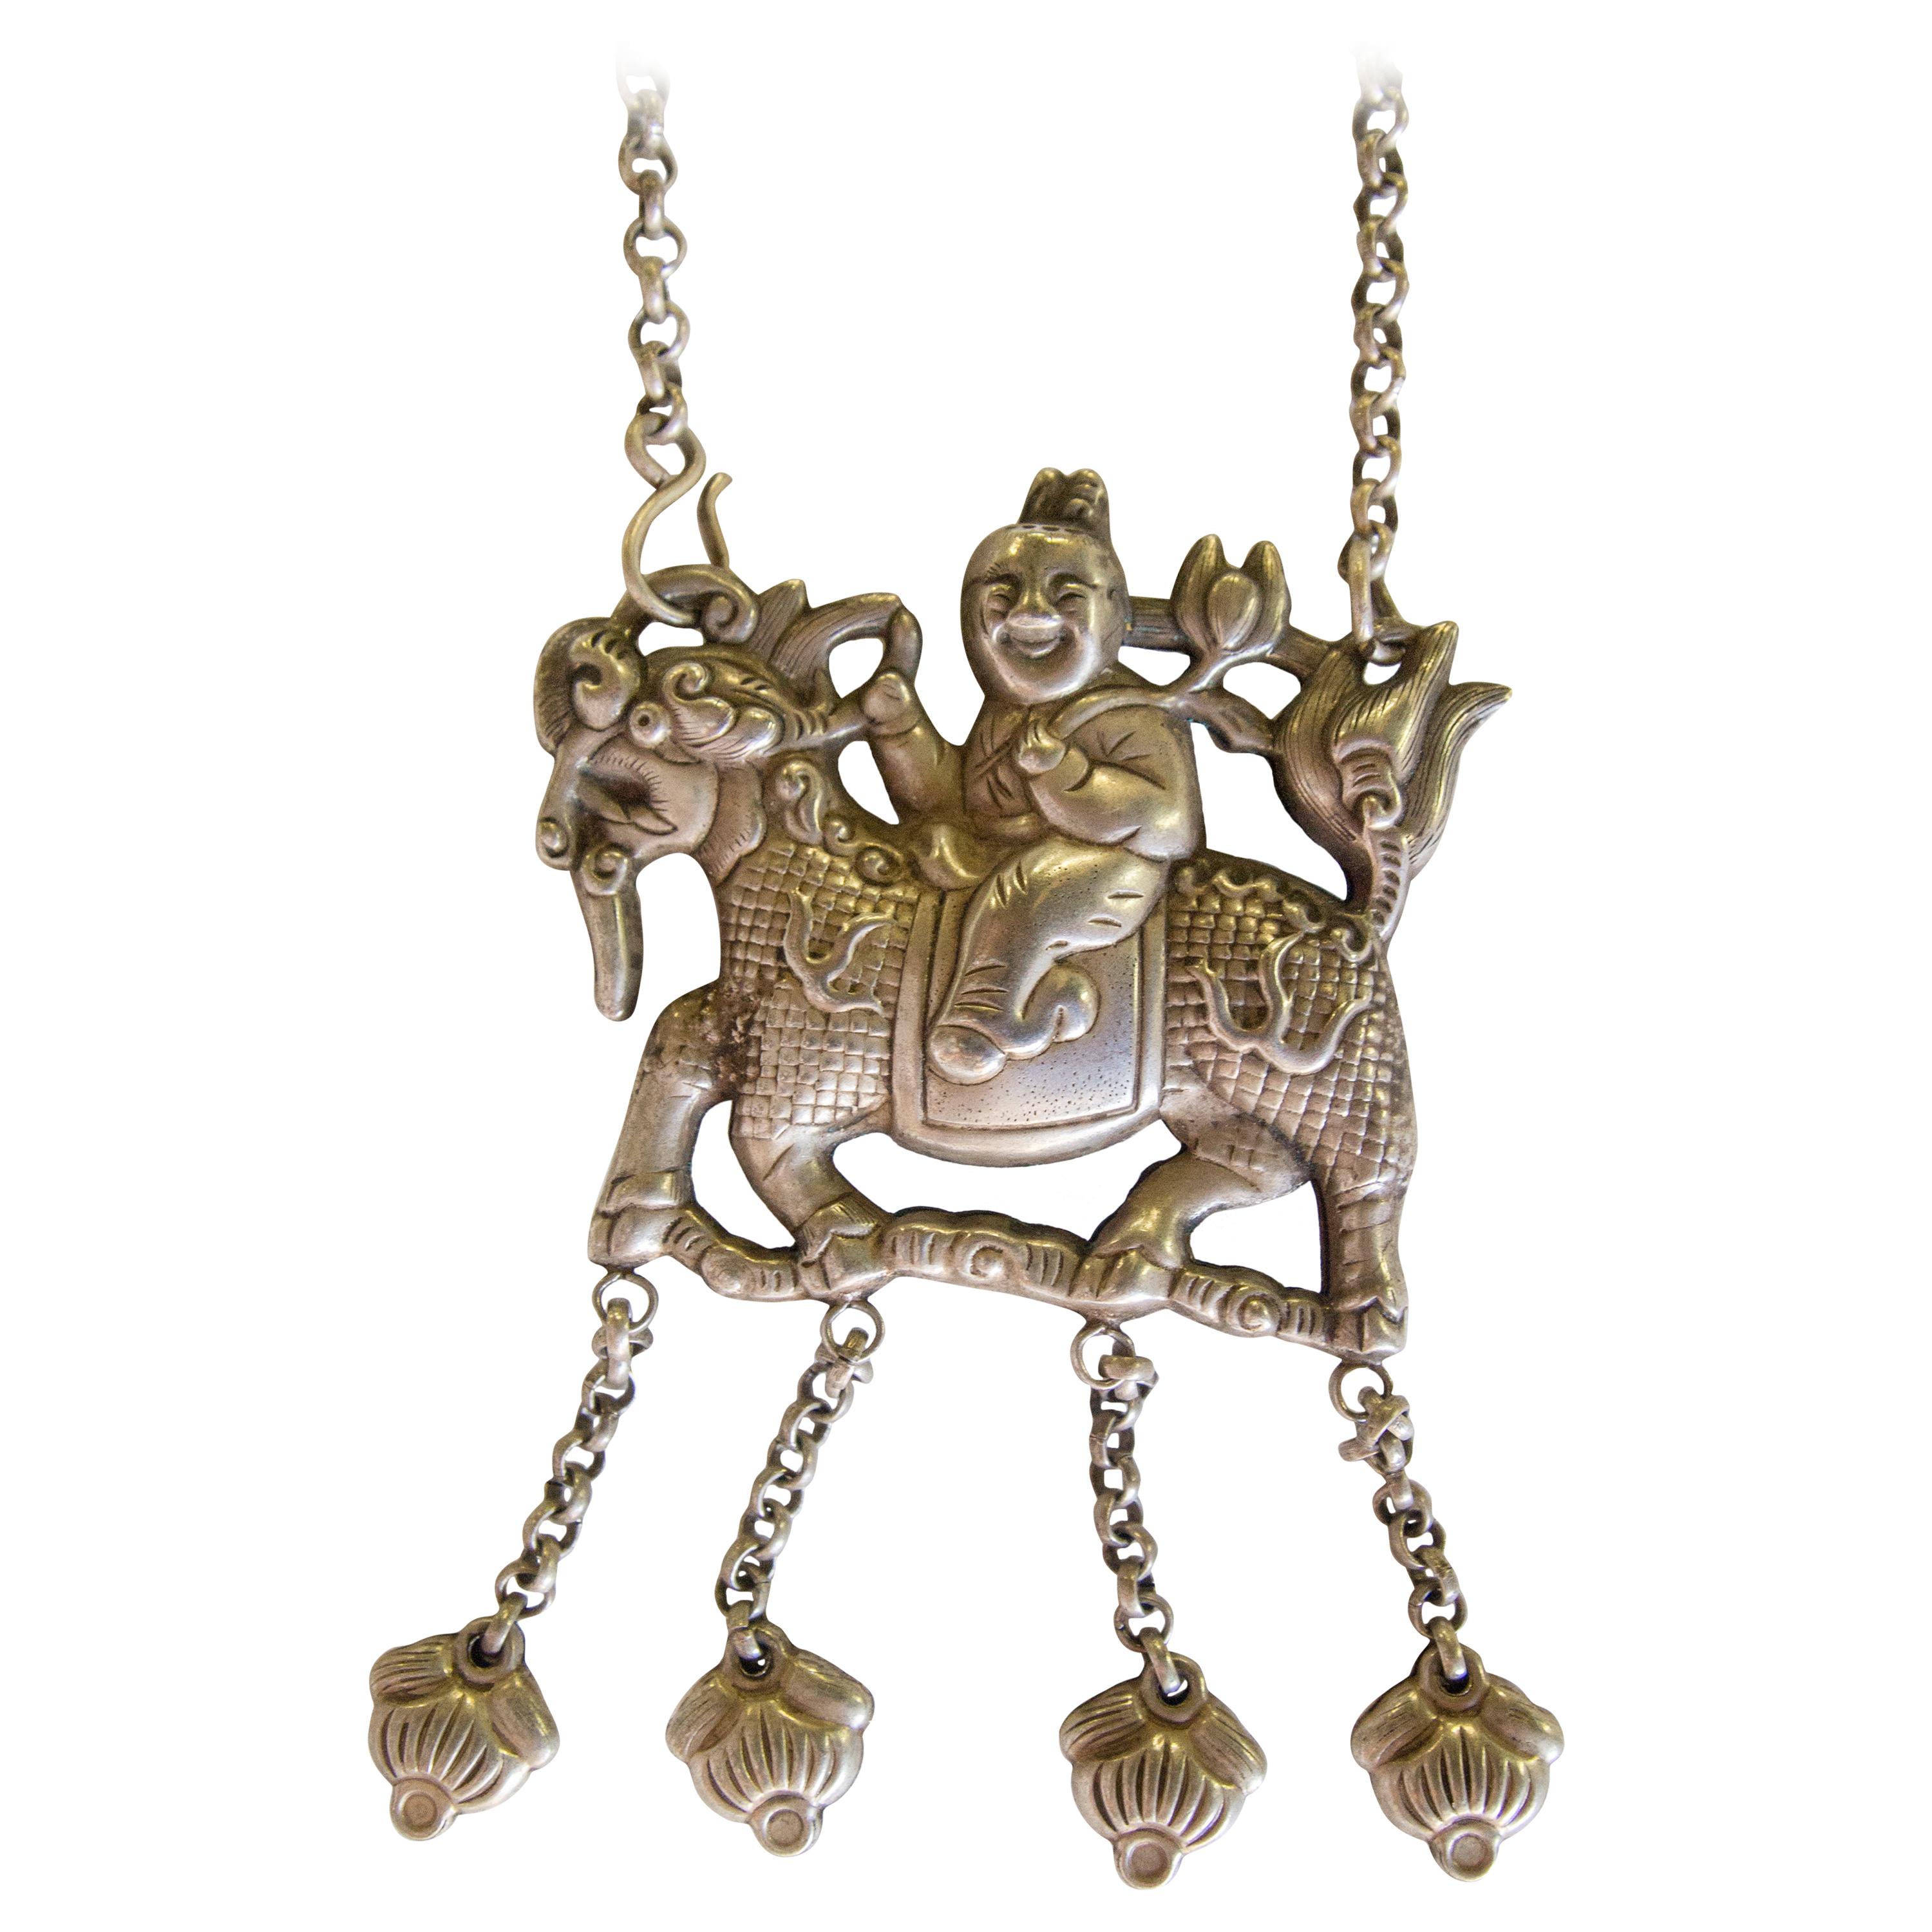 Qilin Amulet Necklace, Silver Alloy, Southwest China, Early 20th Century